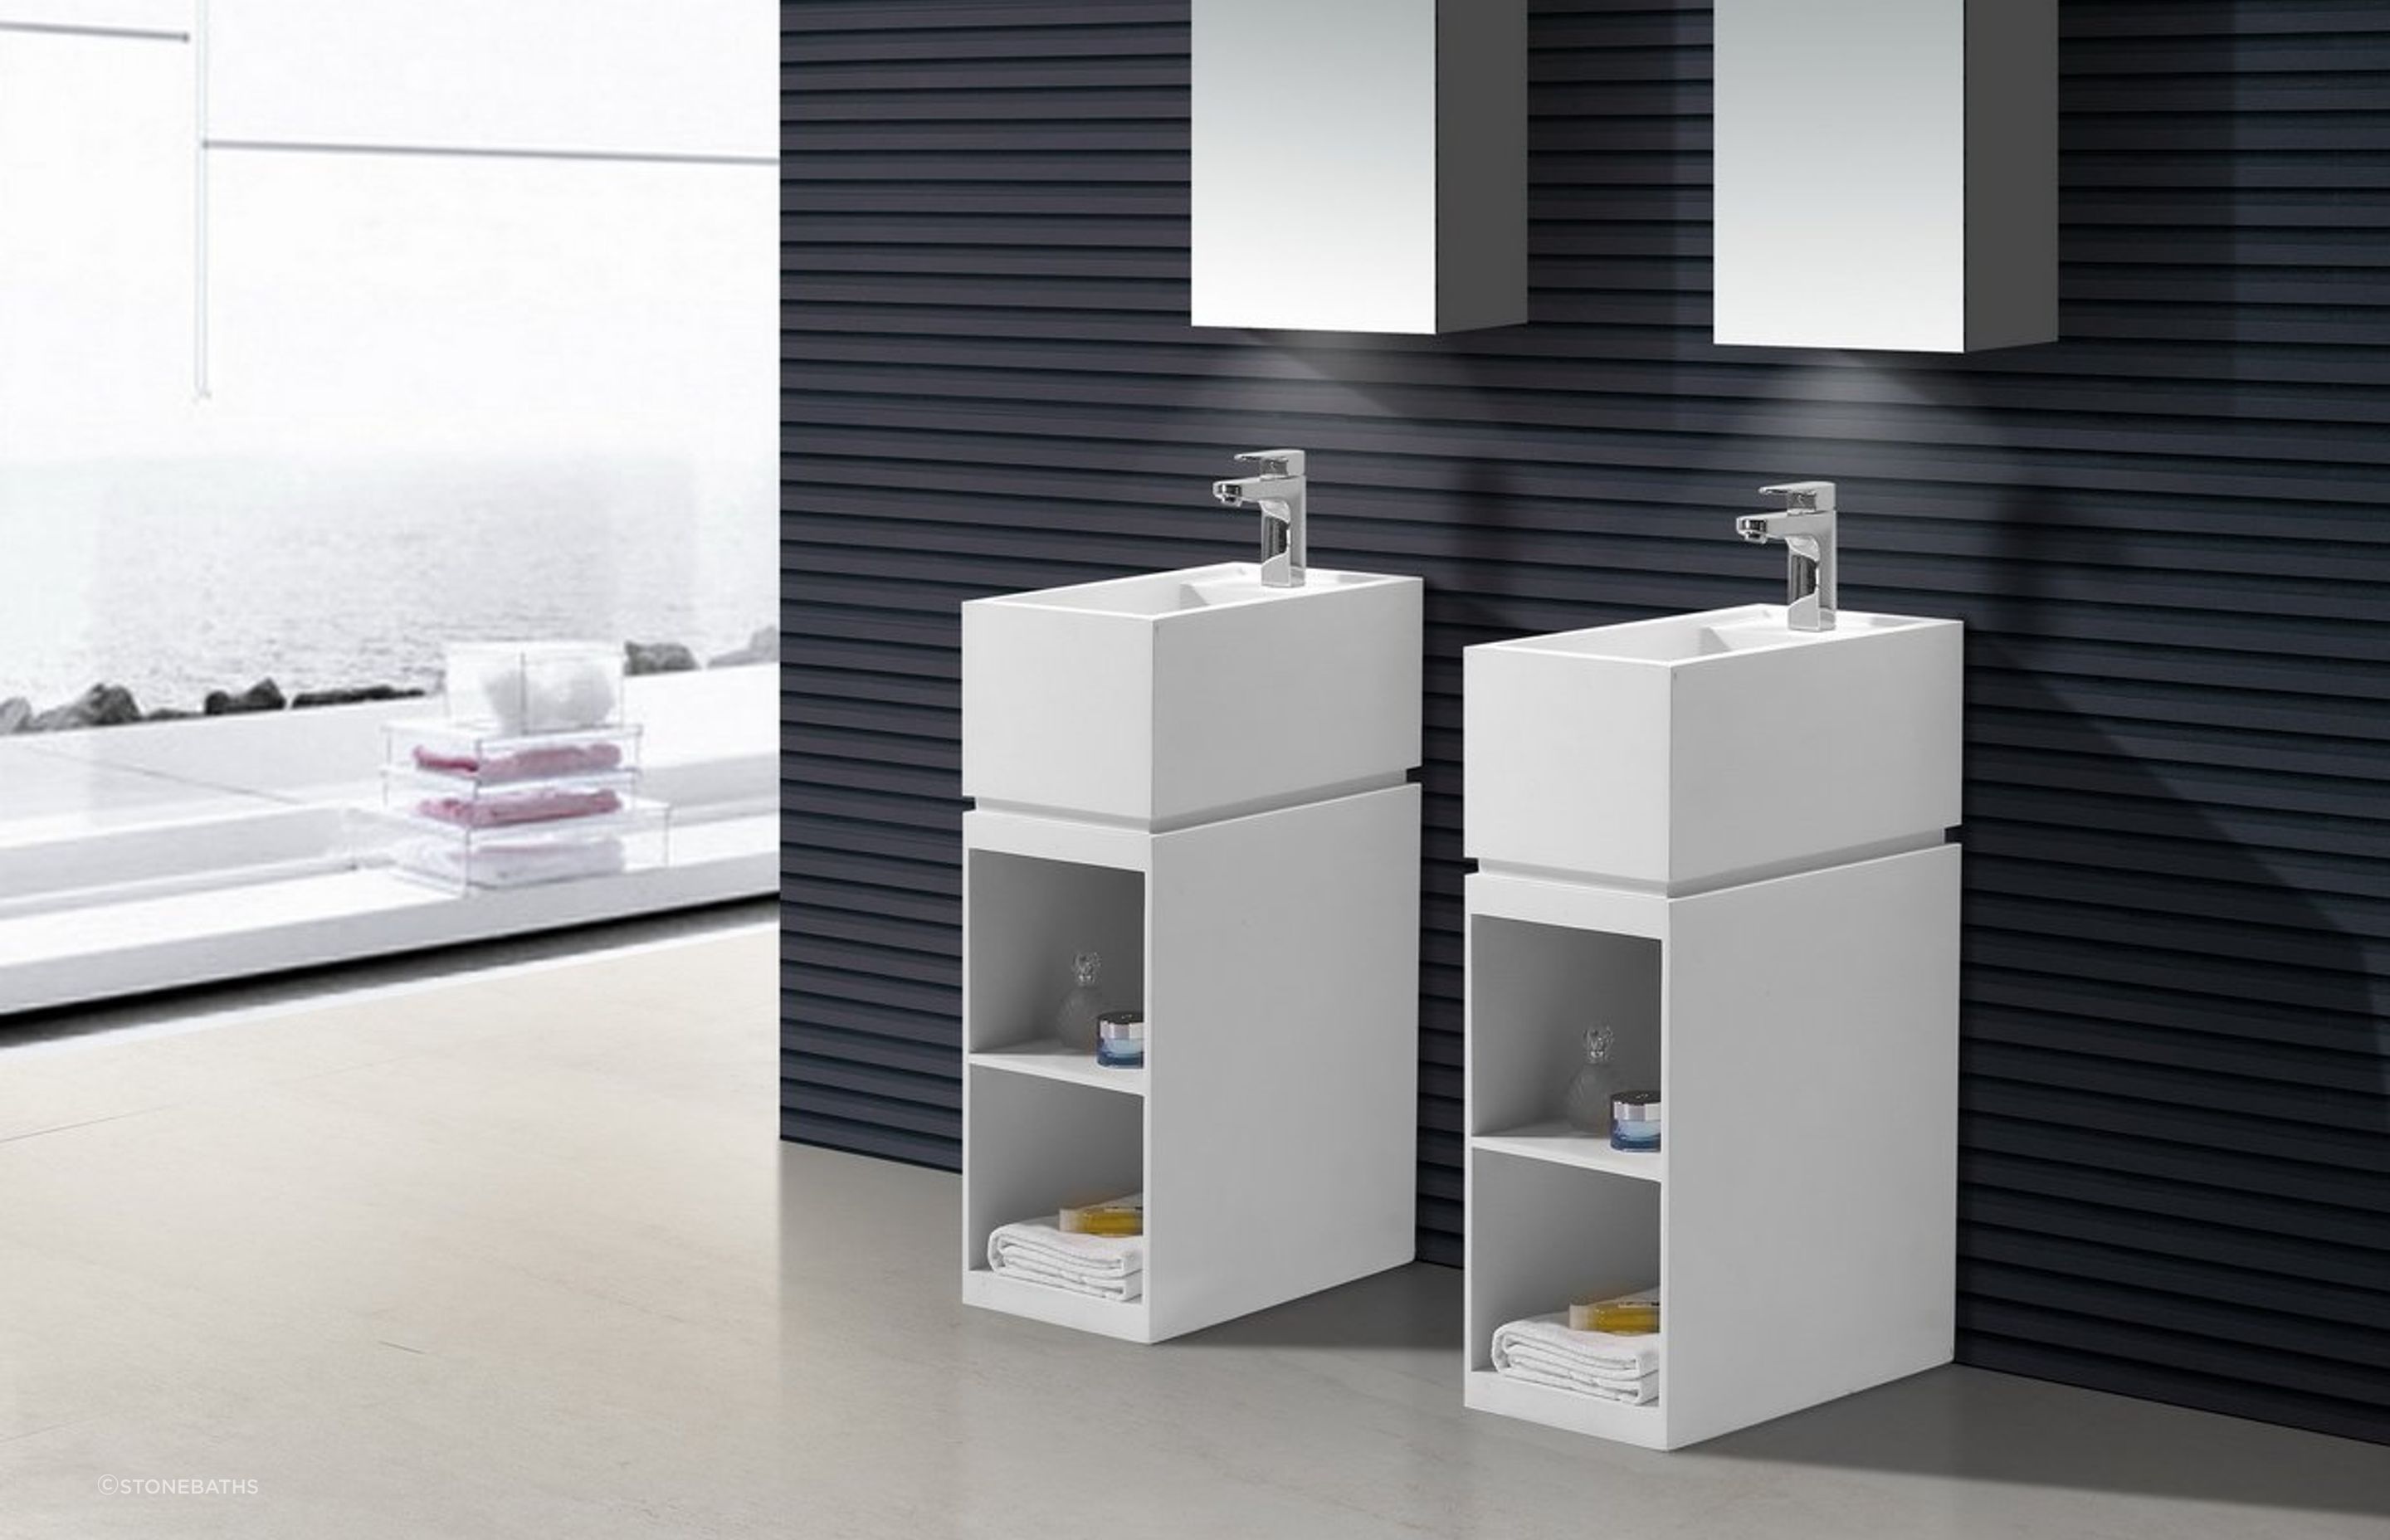 Two Freestanding Stone Basin Units with shelving from Stonebaths